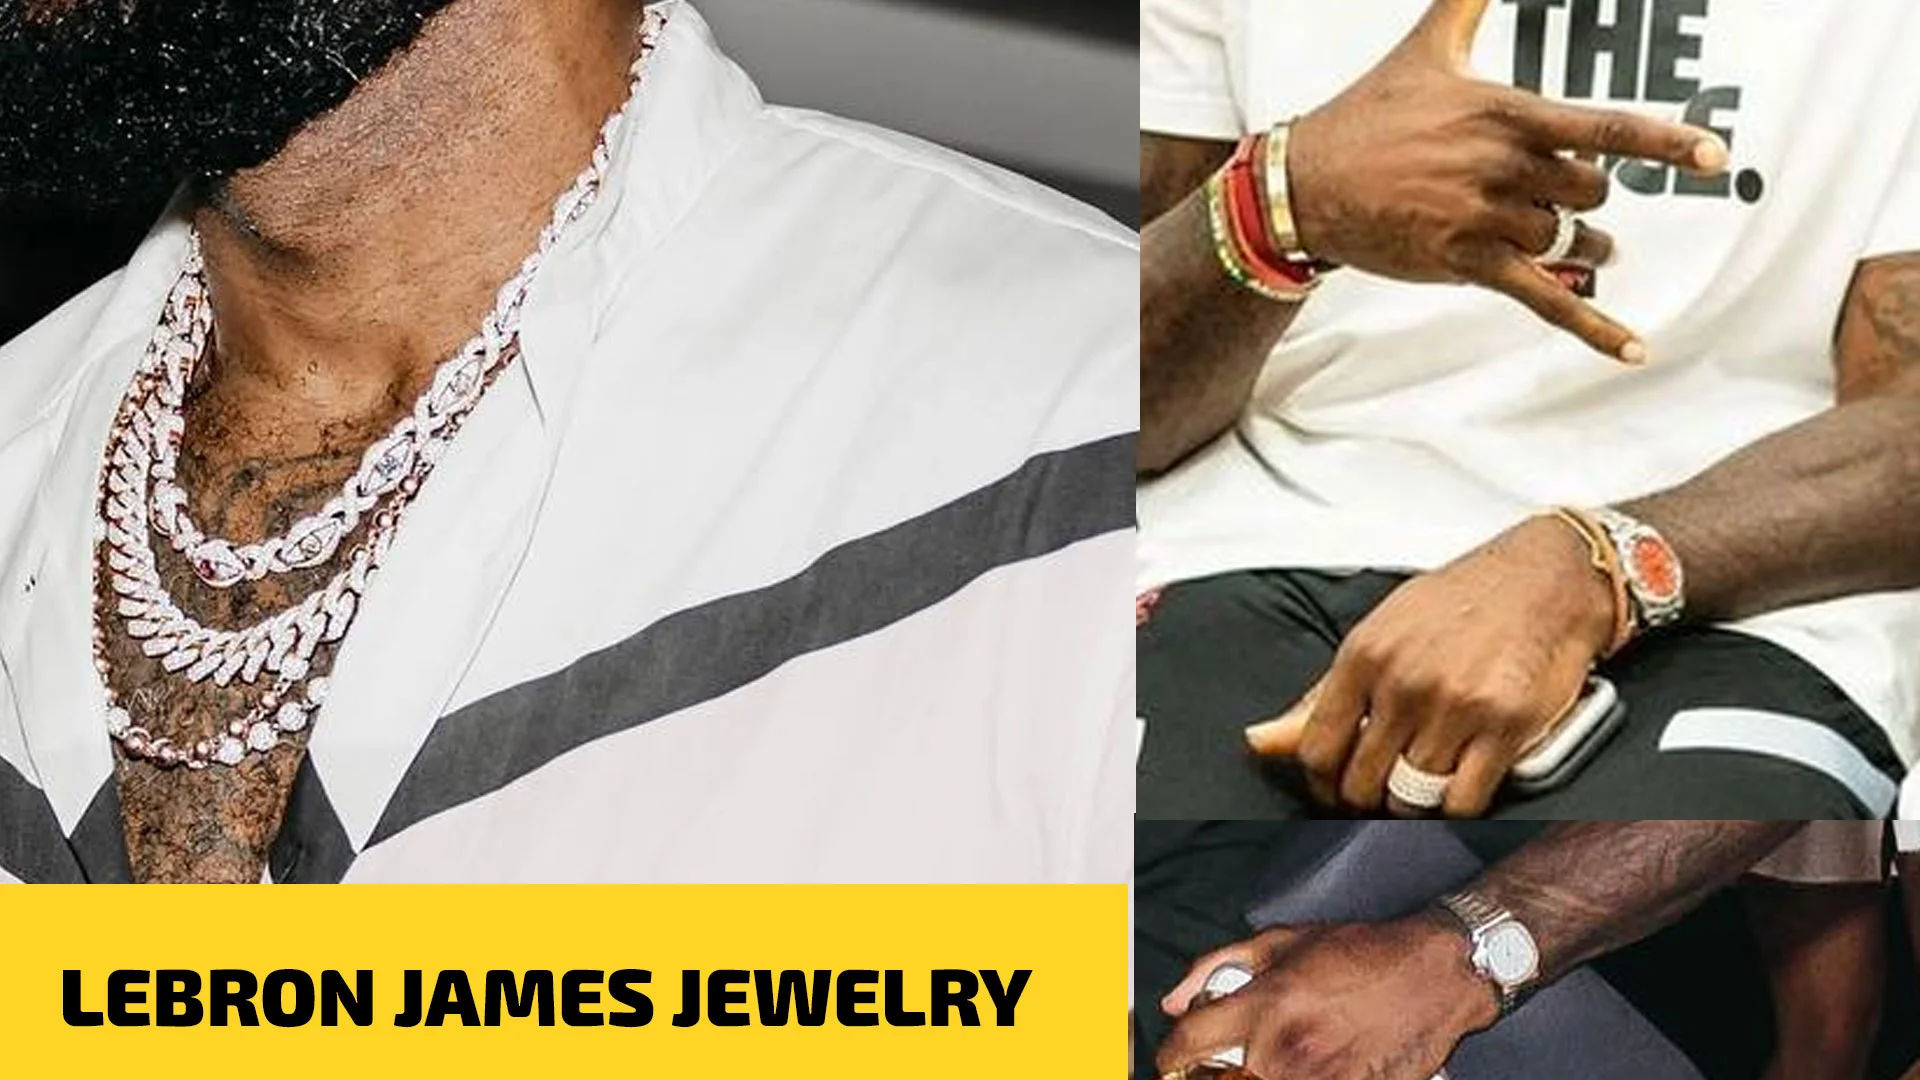 Lebron James jewelry collection